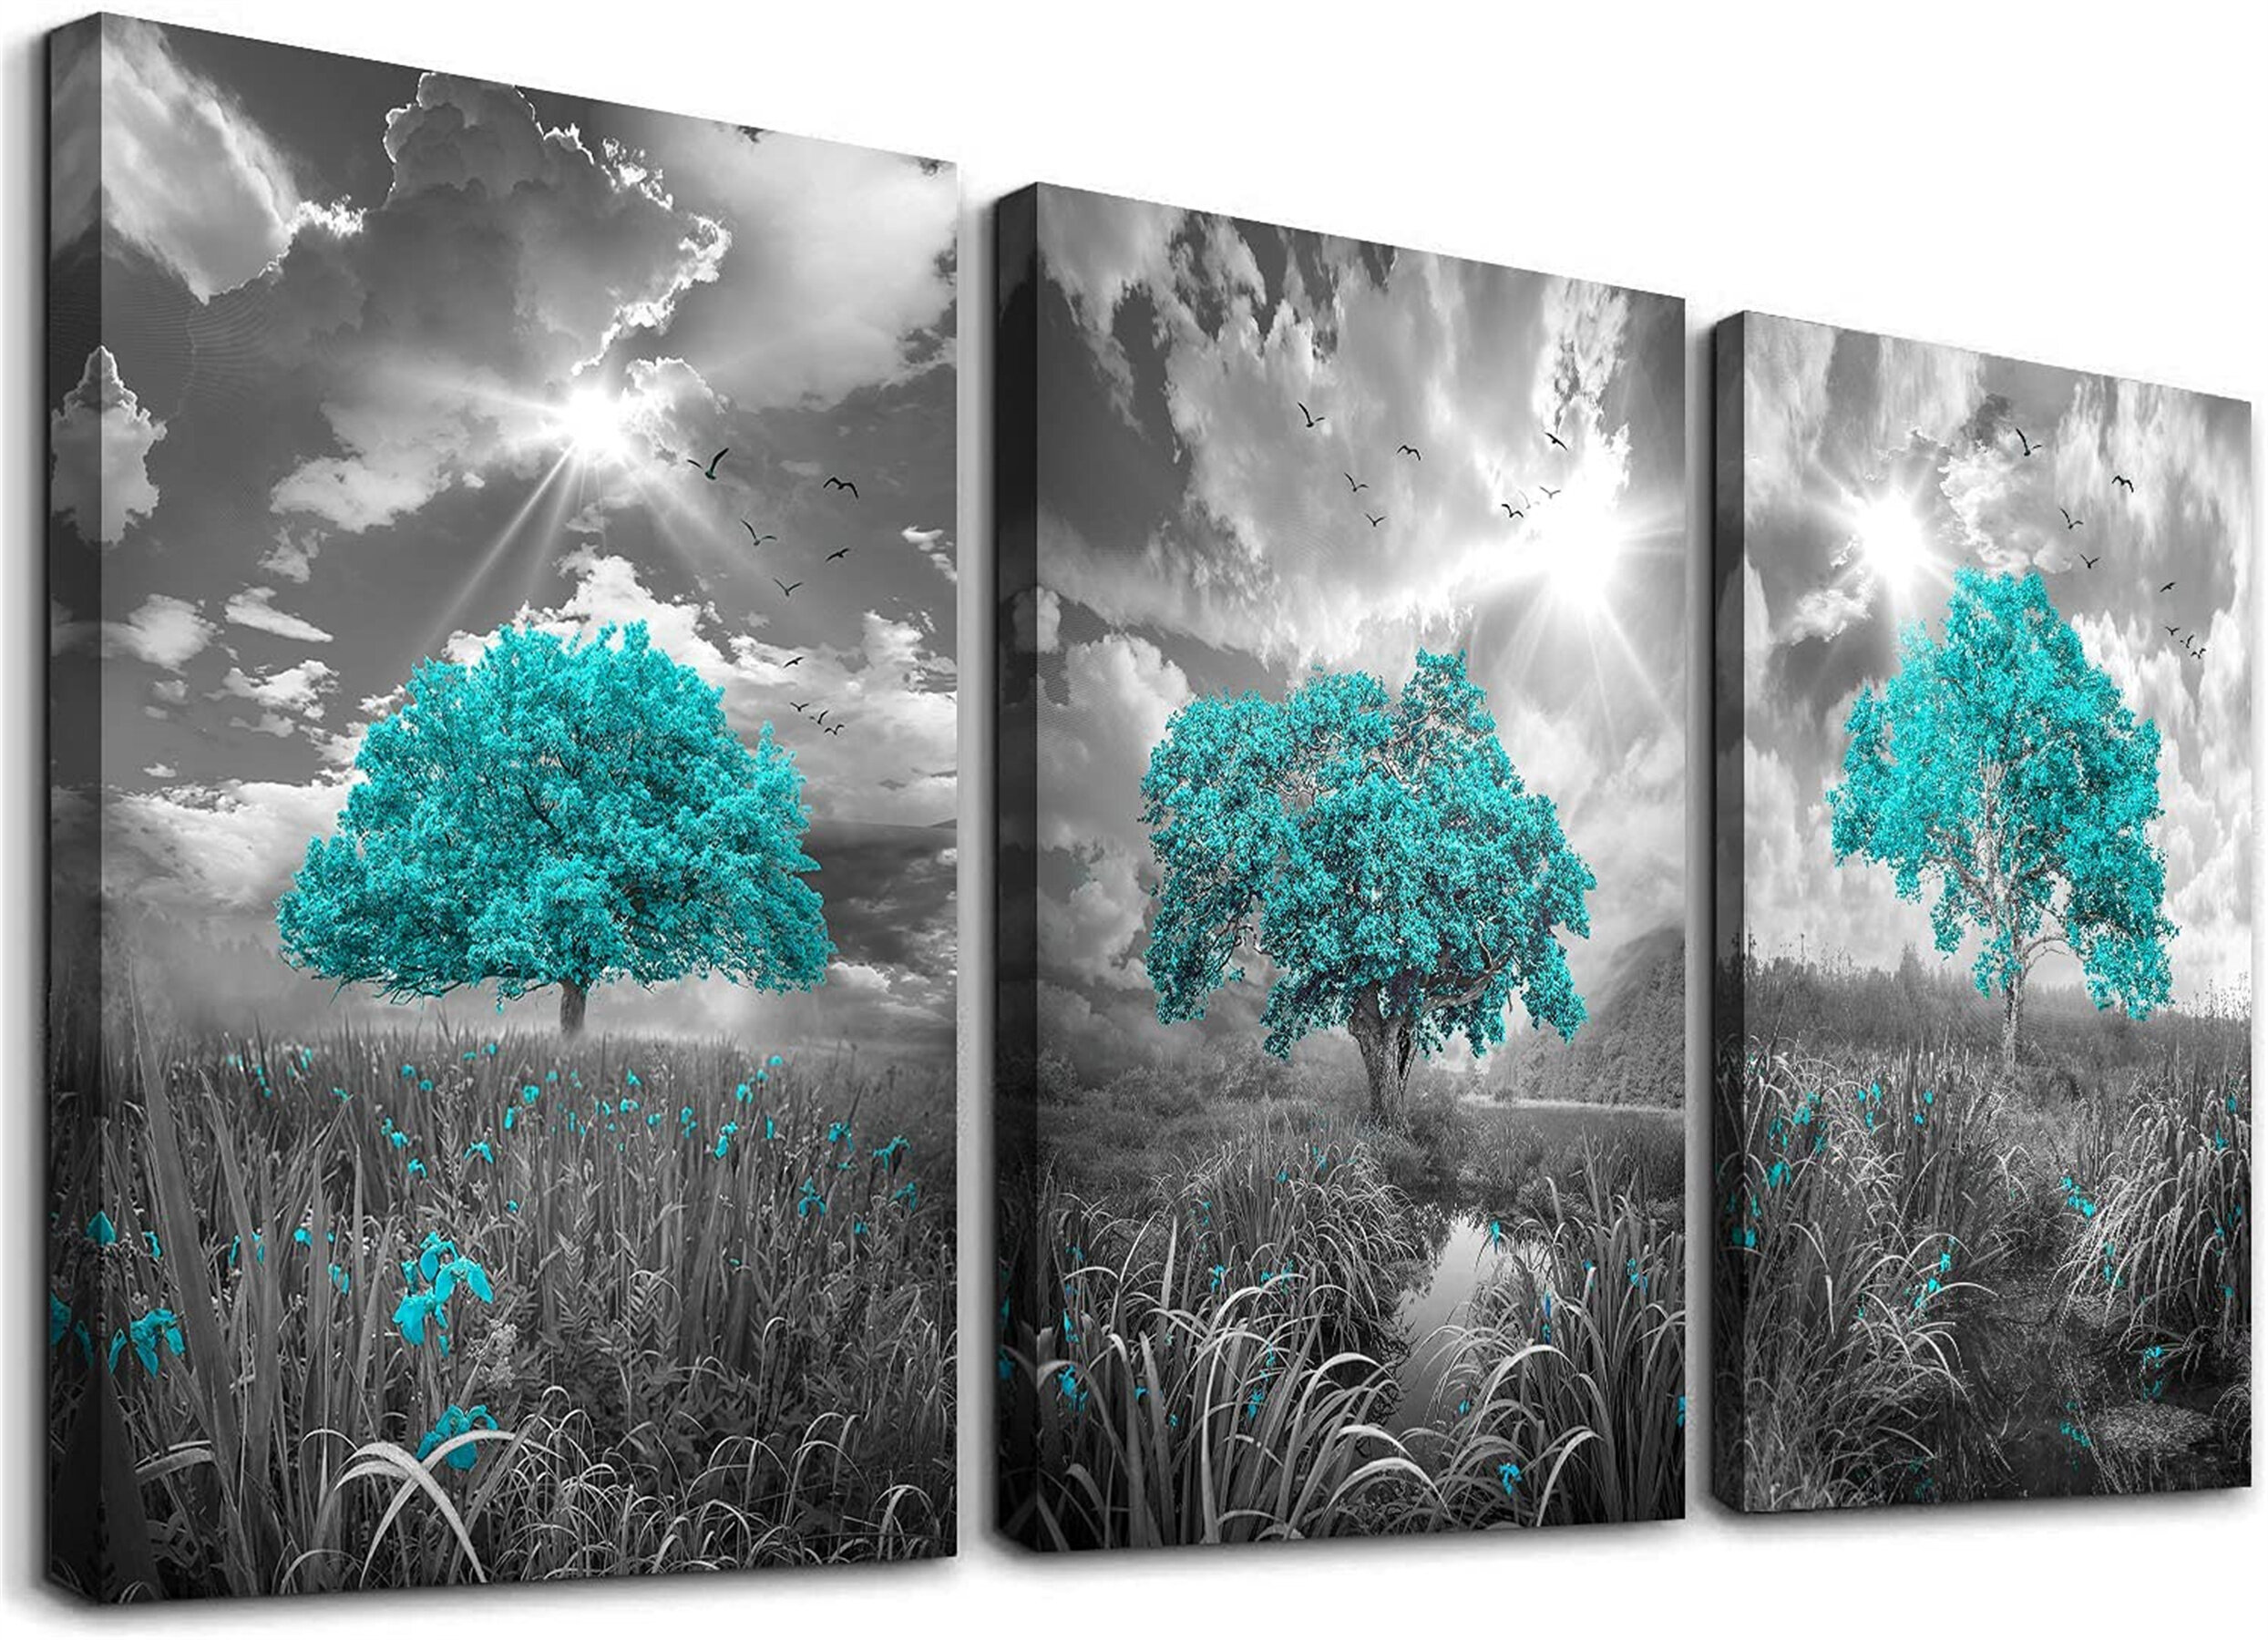 Home Silver City Reflection Painted Restaurant Wall Canva Decor 5PCS Painting 